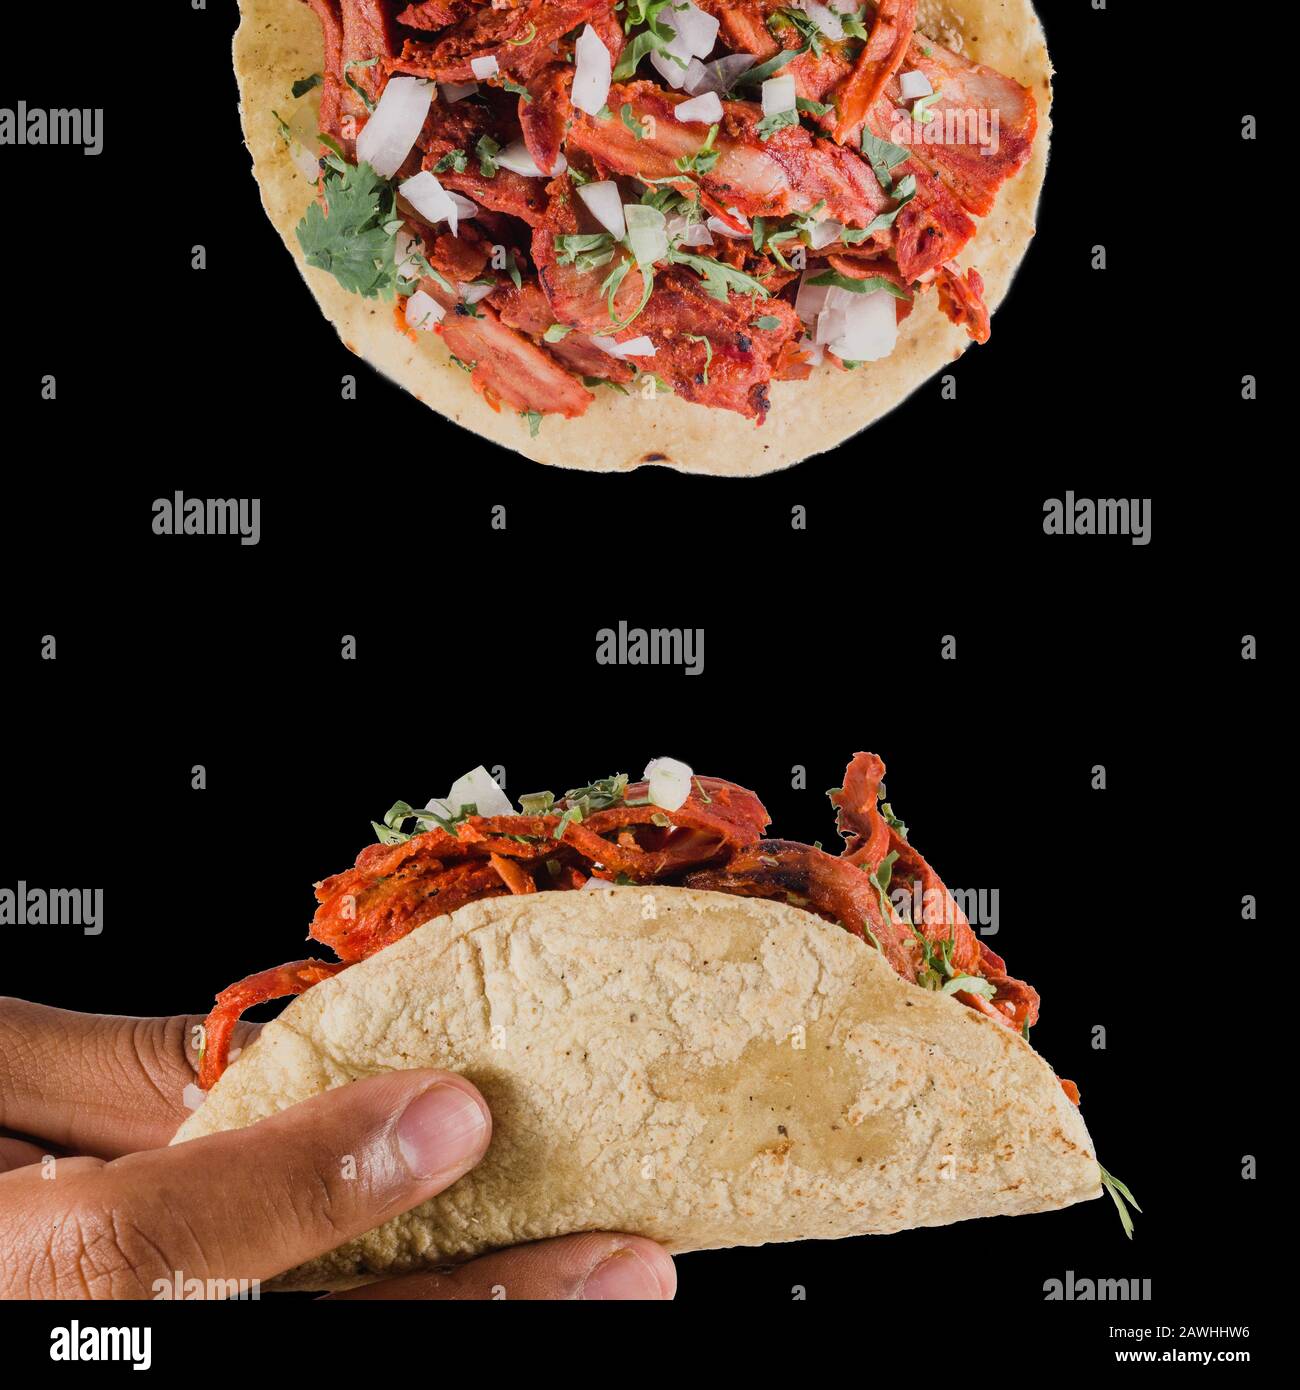 Tacos al pastor design composition on a black background, with a person squeezing lime on it. Authentic mexican tacos with marinated meat, onion, pine Stock Photo